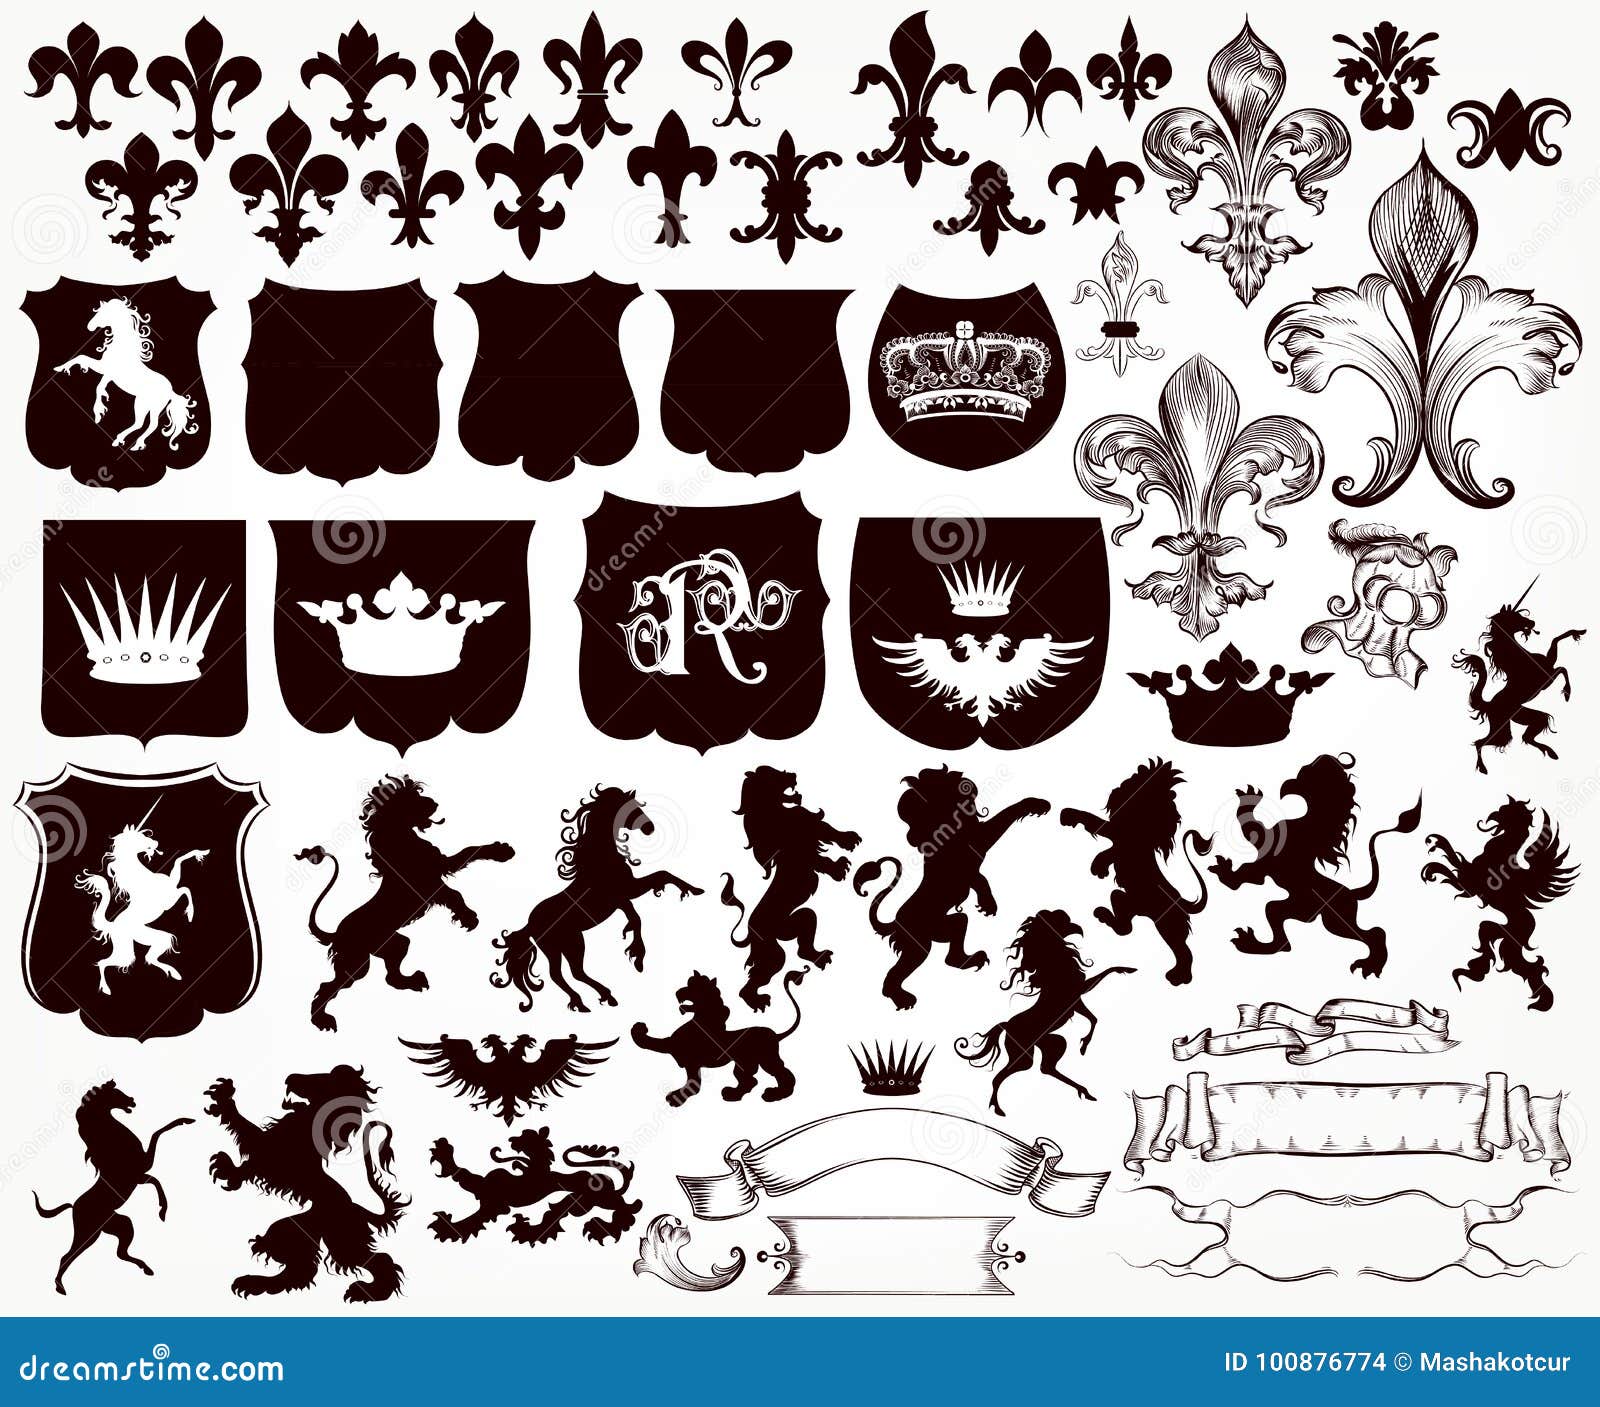 heraldic collection of shields, silhouettes of lions